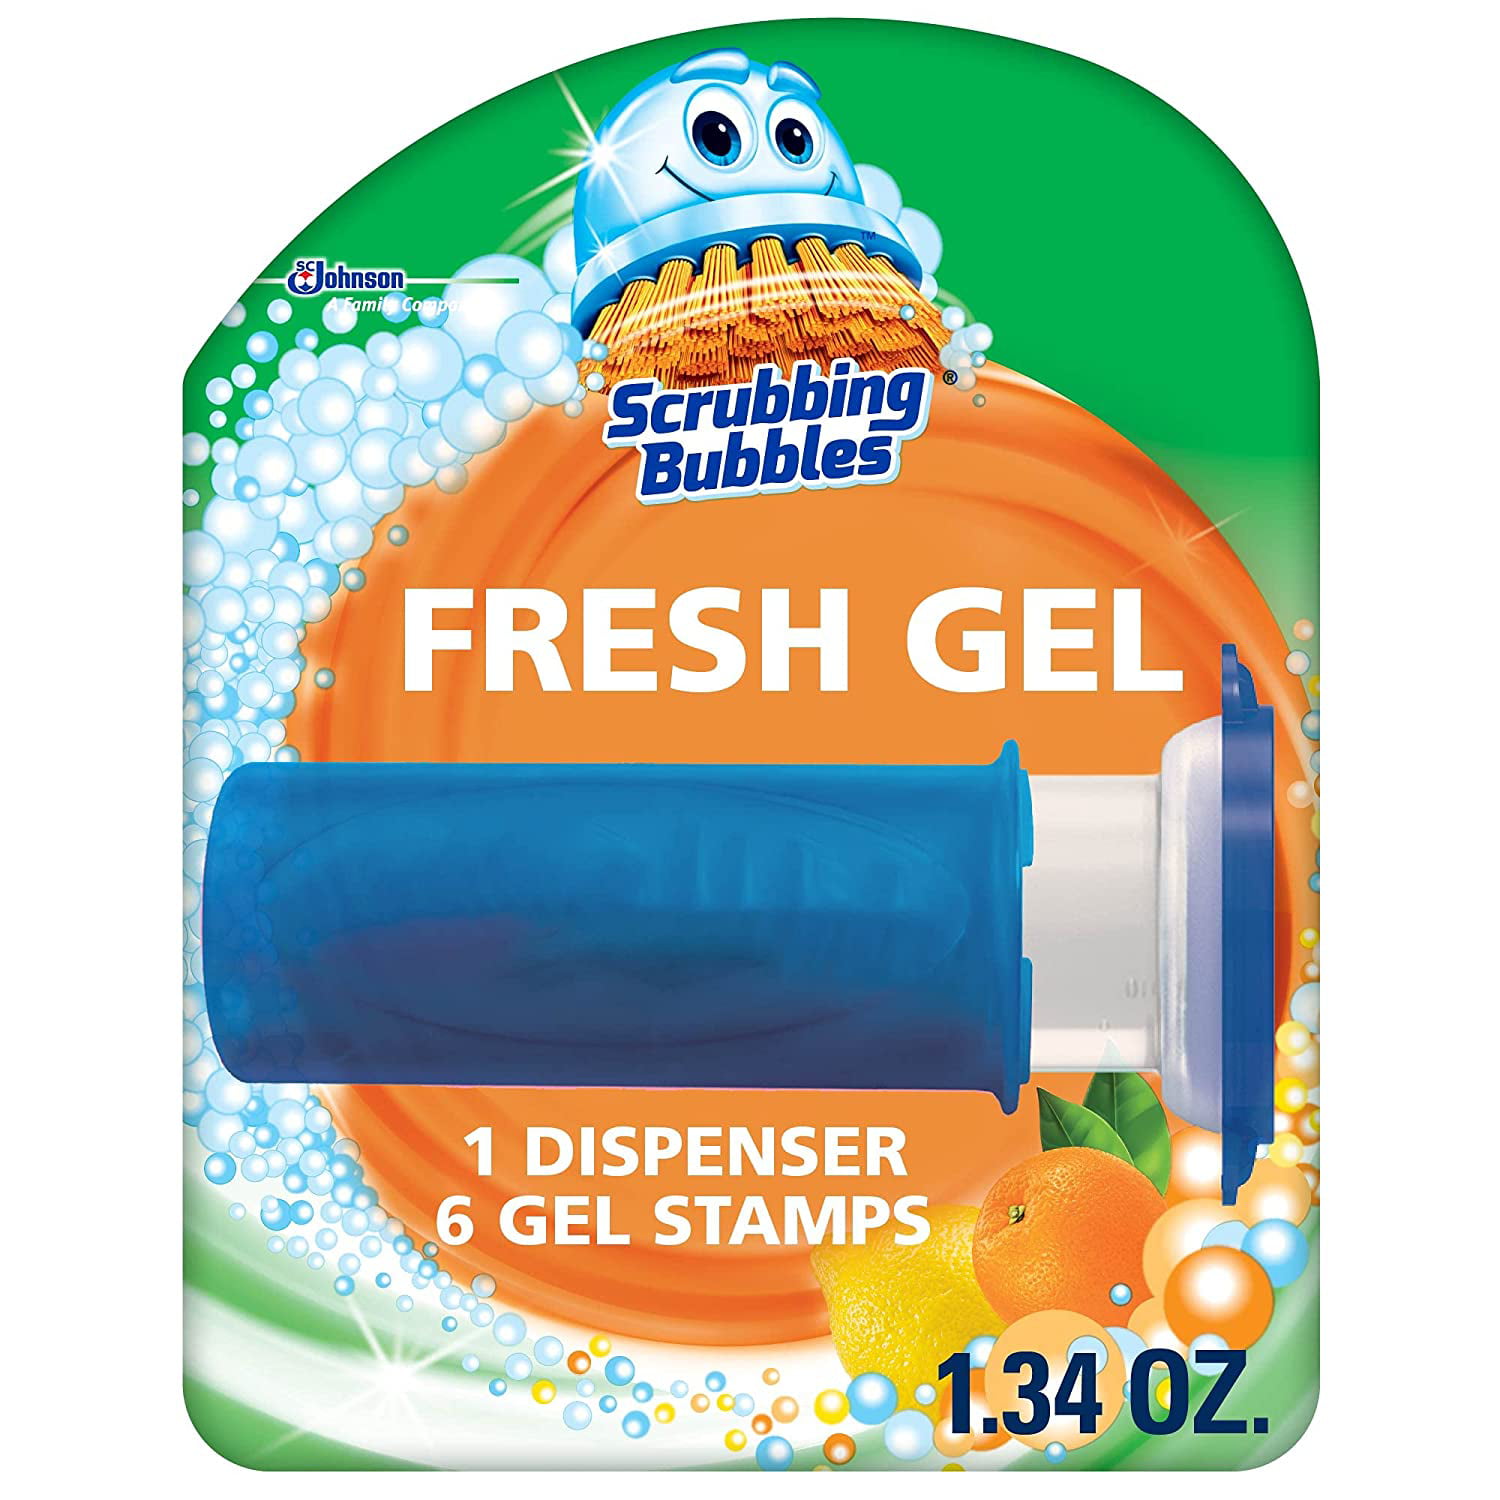 Gel Cleaner Scrubbing Bubbles Fresh Gel Toilet Bowl Cleaning Stamps Helps  … 